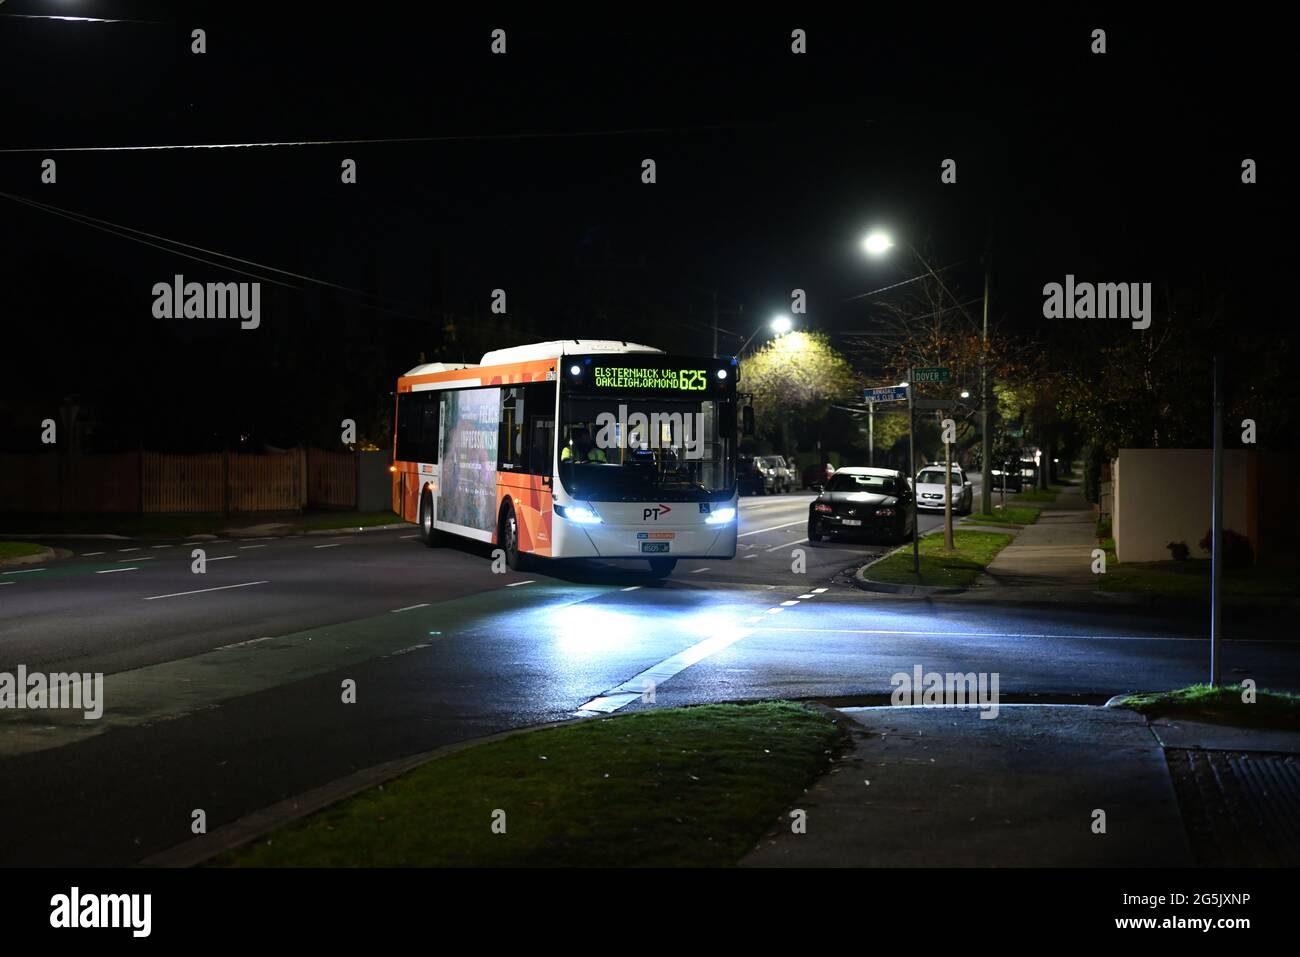 Route 625 bus, a Volgren model operated by CDC Melbourne, crosses Bambra Rd late at night on its way to Elsternwick Stock Photo